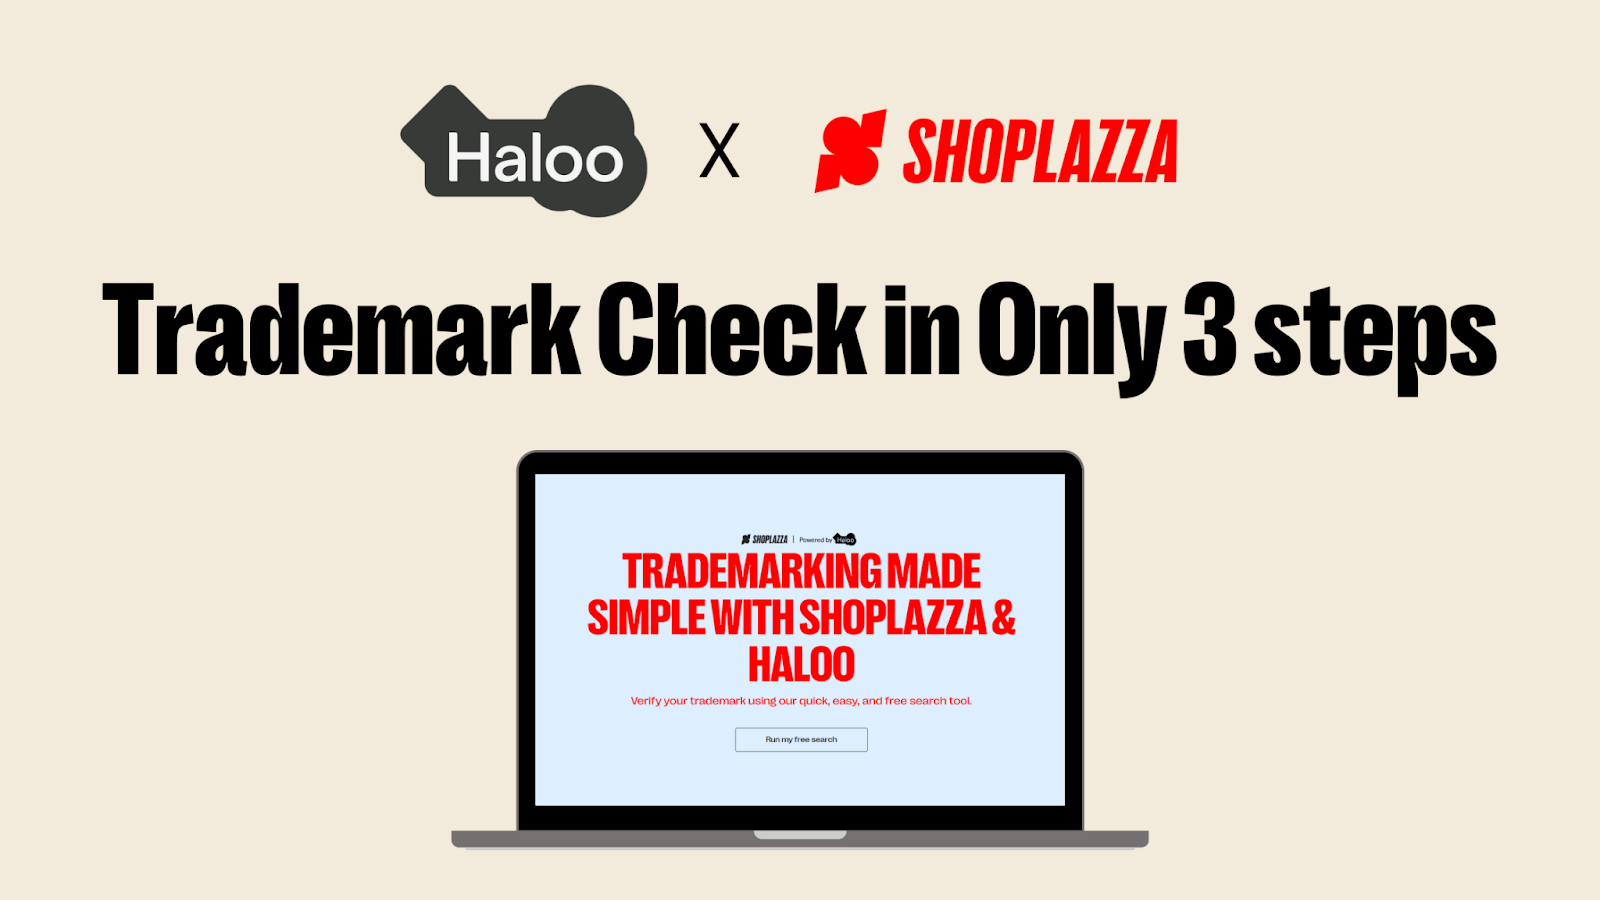 Trademark Check in Only 3 Steps with Haloo on Shoplazza